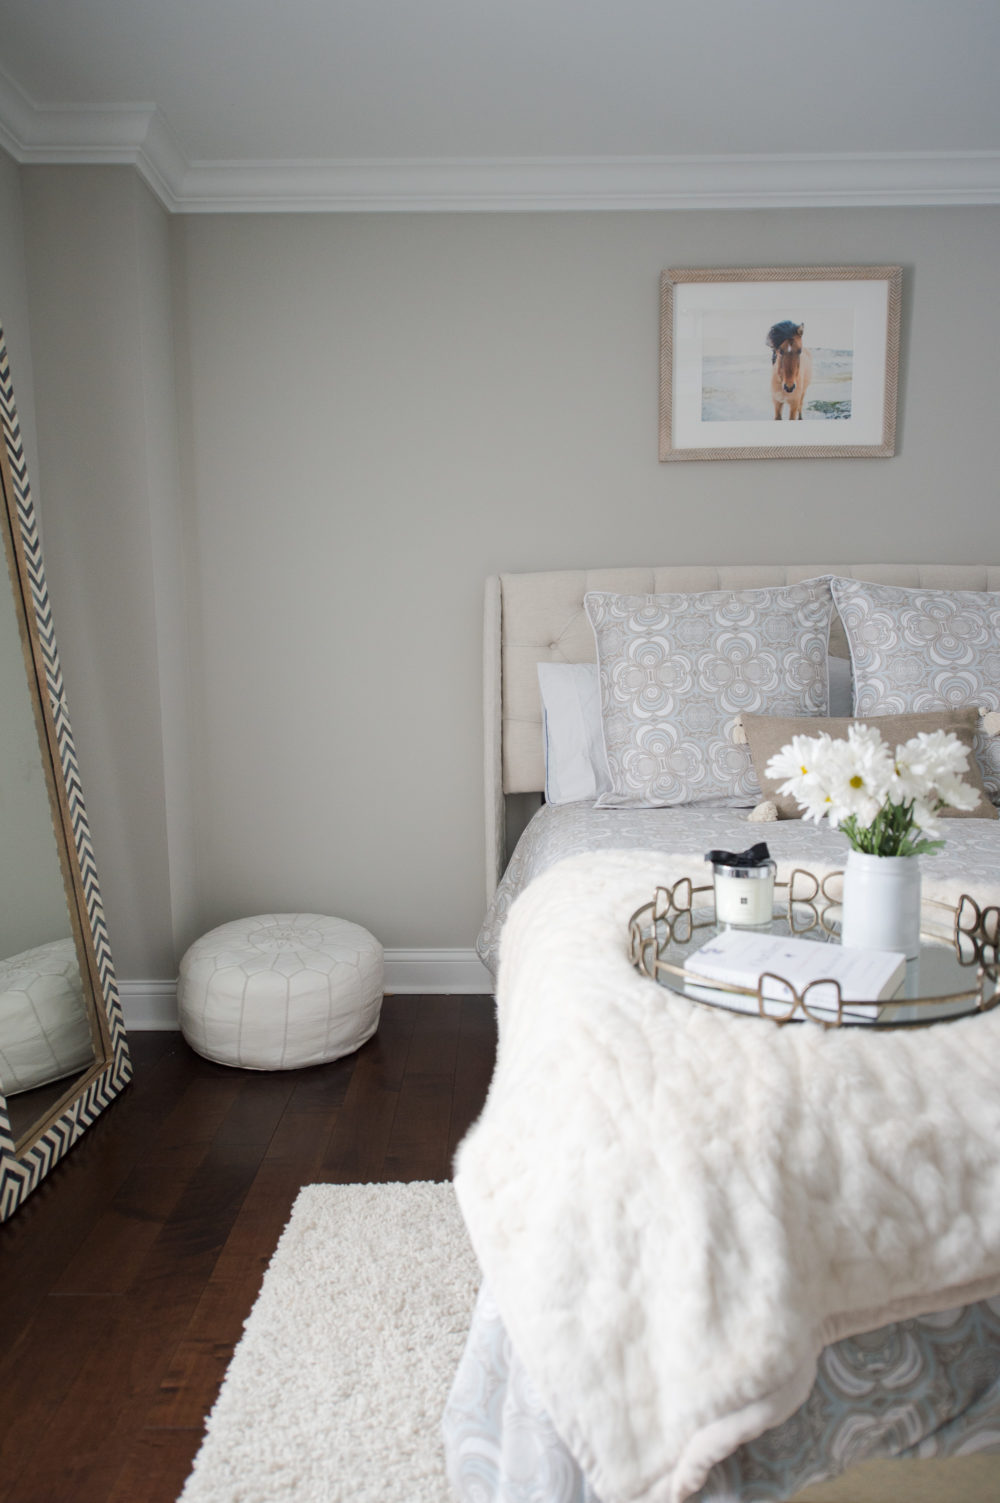 Petite Fashion and Style Blog | Nectar Mattress Review | Minted Artwork | Click to Read More... - Nectar Mattress Review by popular Michigan lifestyle blogger The Blue Hydrangeas